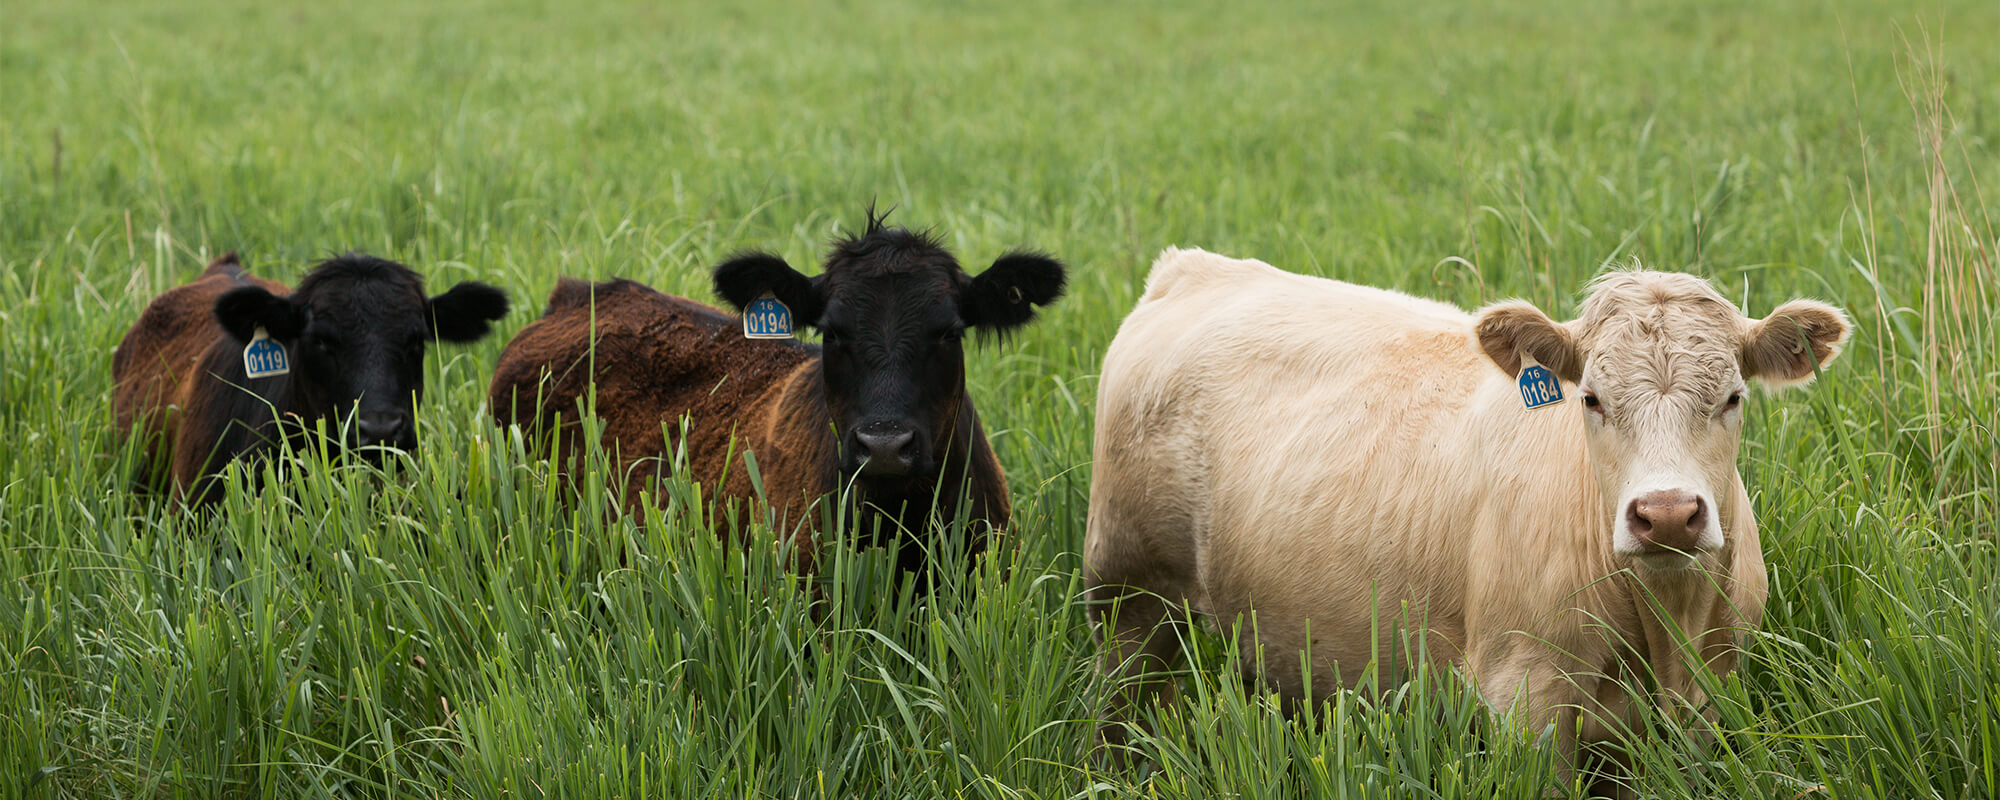 Two Cows standing in tall-grass pasture